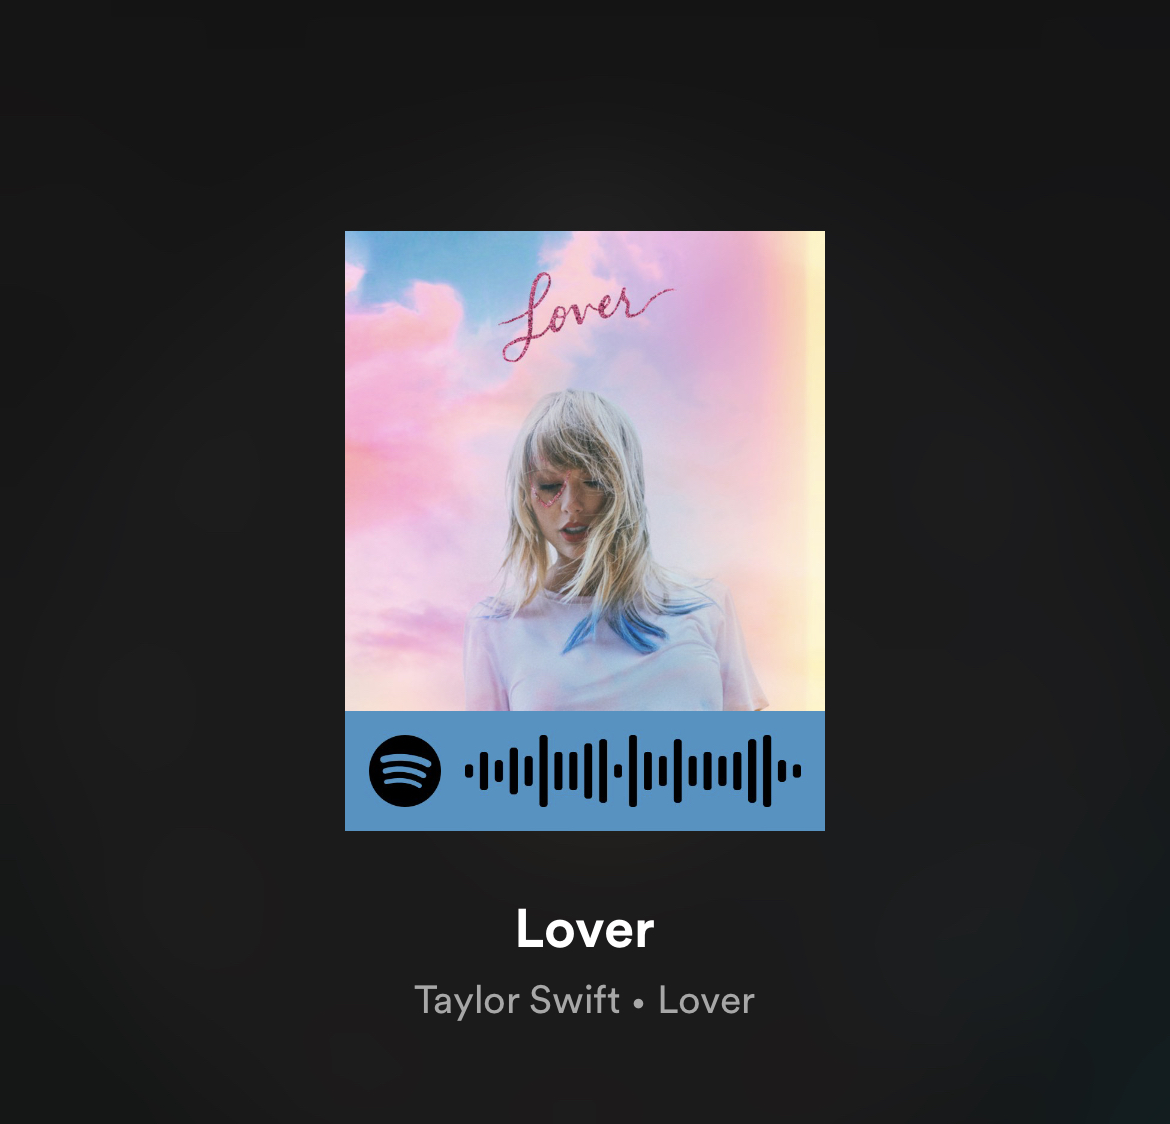 Lover by Taylor Swift album cover